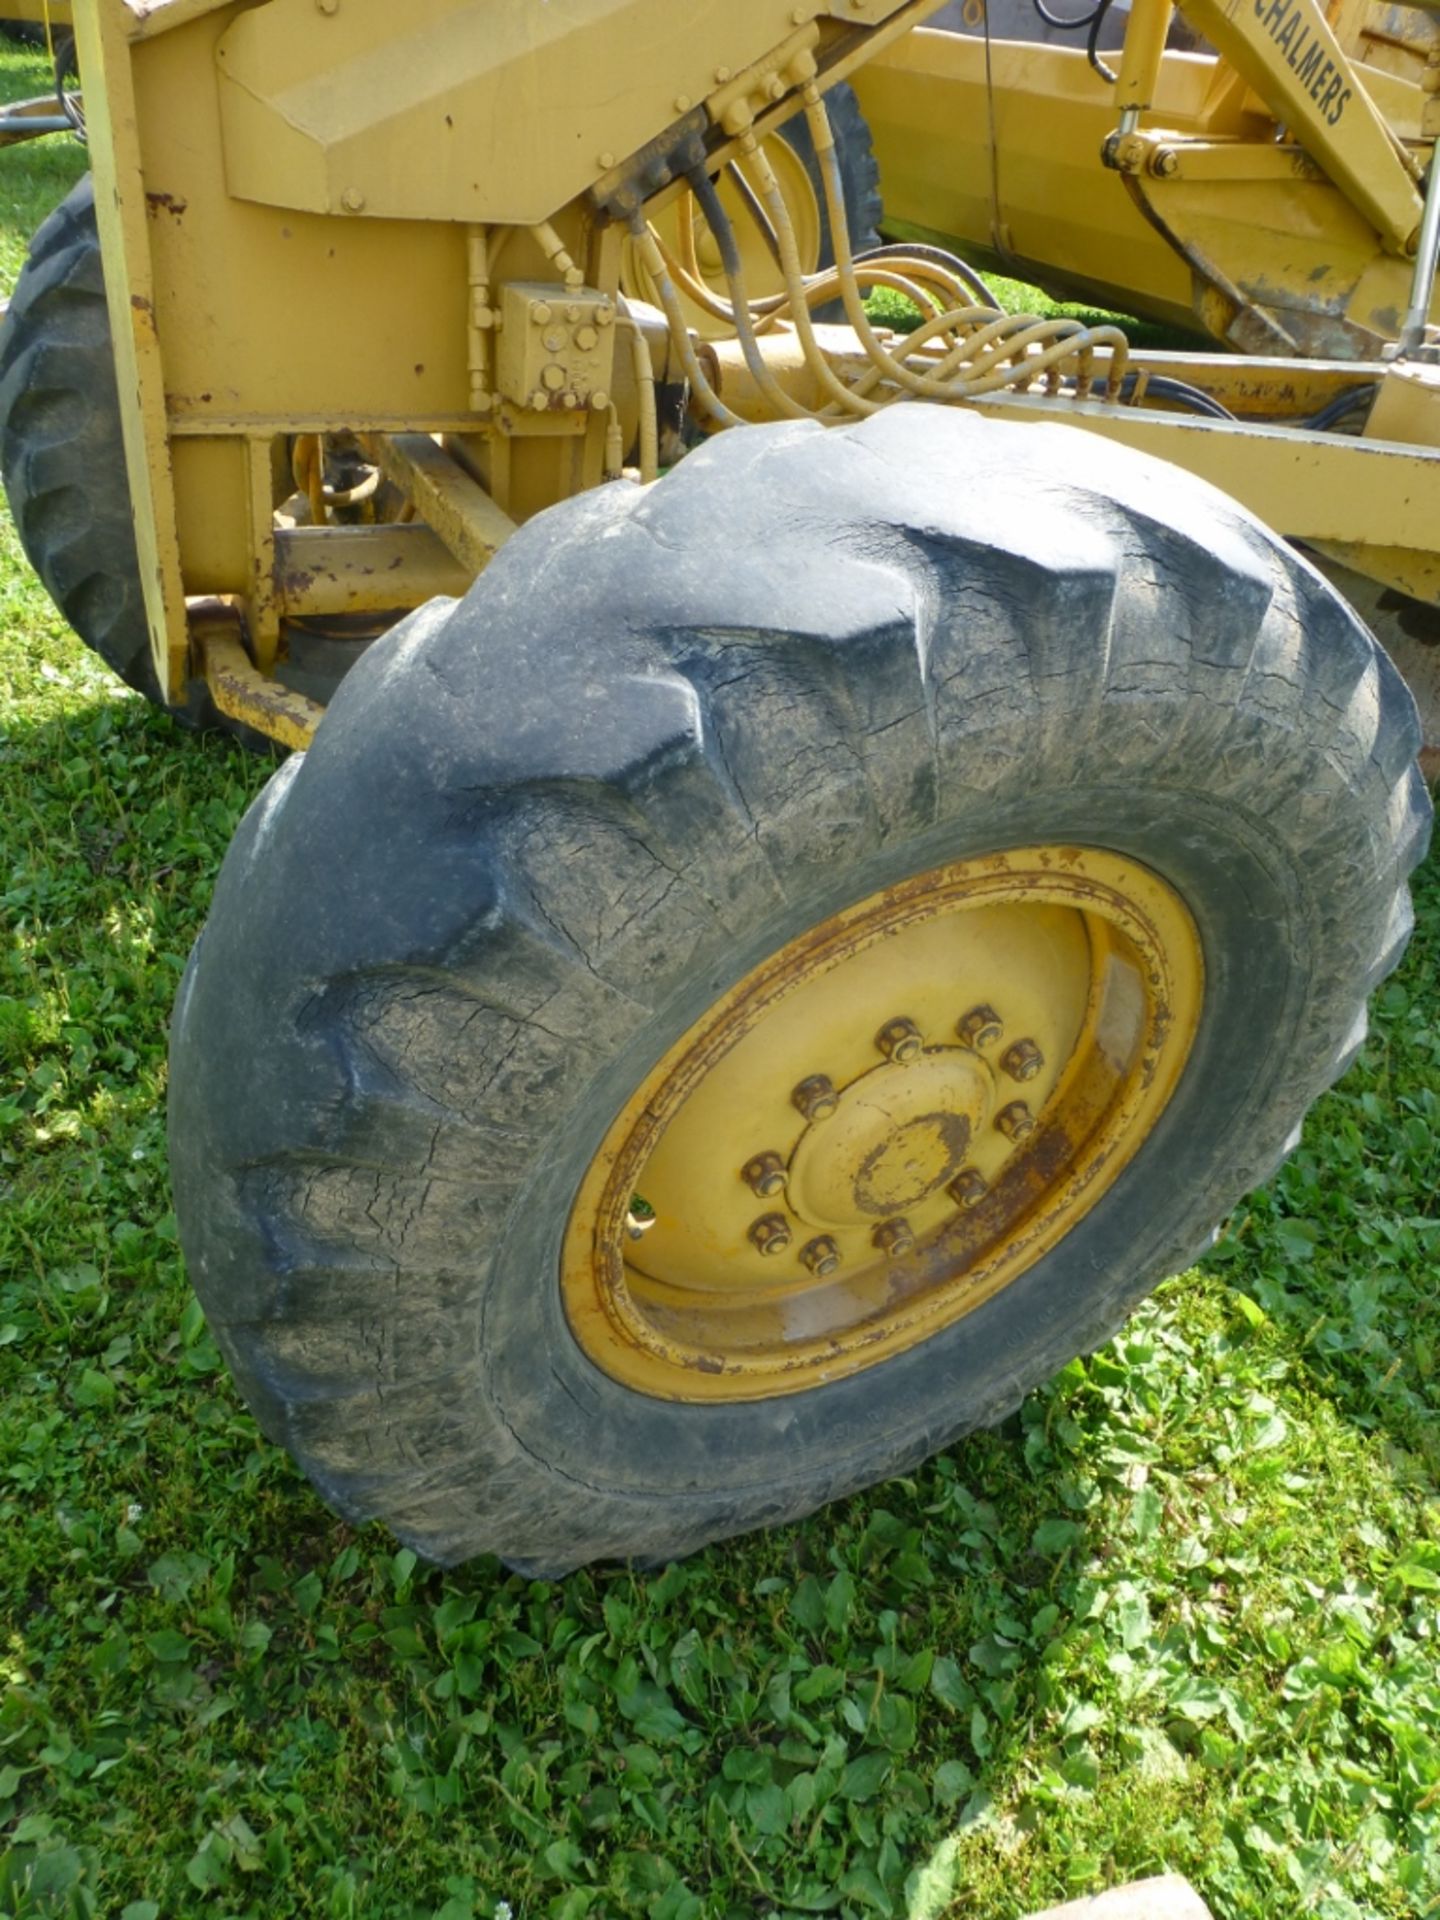 Caterpillar 120G motor grader with 13'10" moldboard se:87v871. Power shift. 7720 unverified hrs. - Image 2 of 27